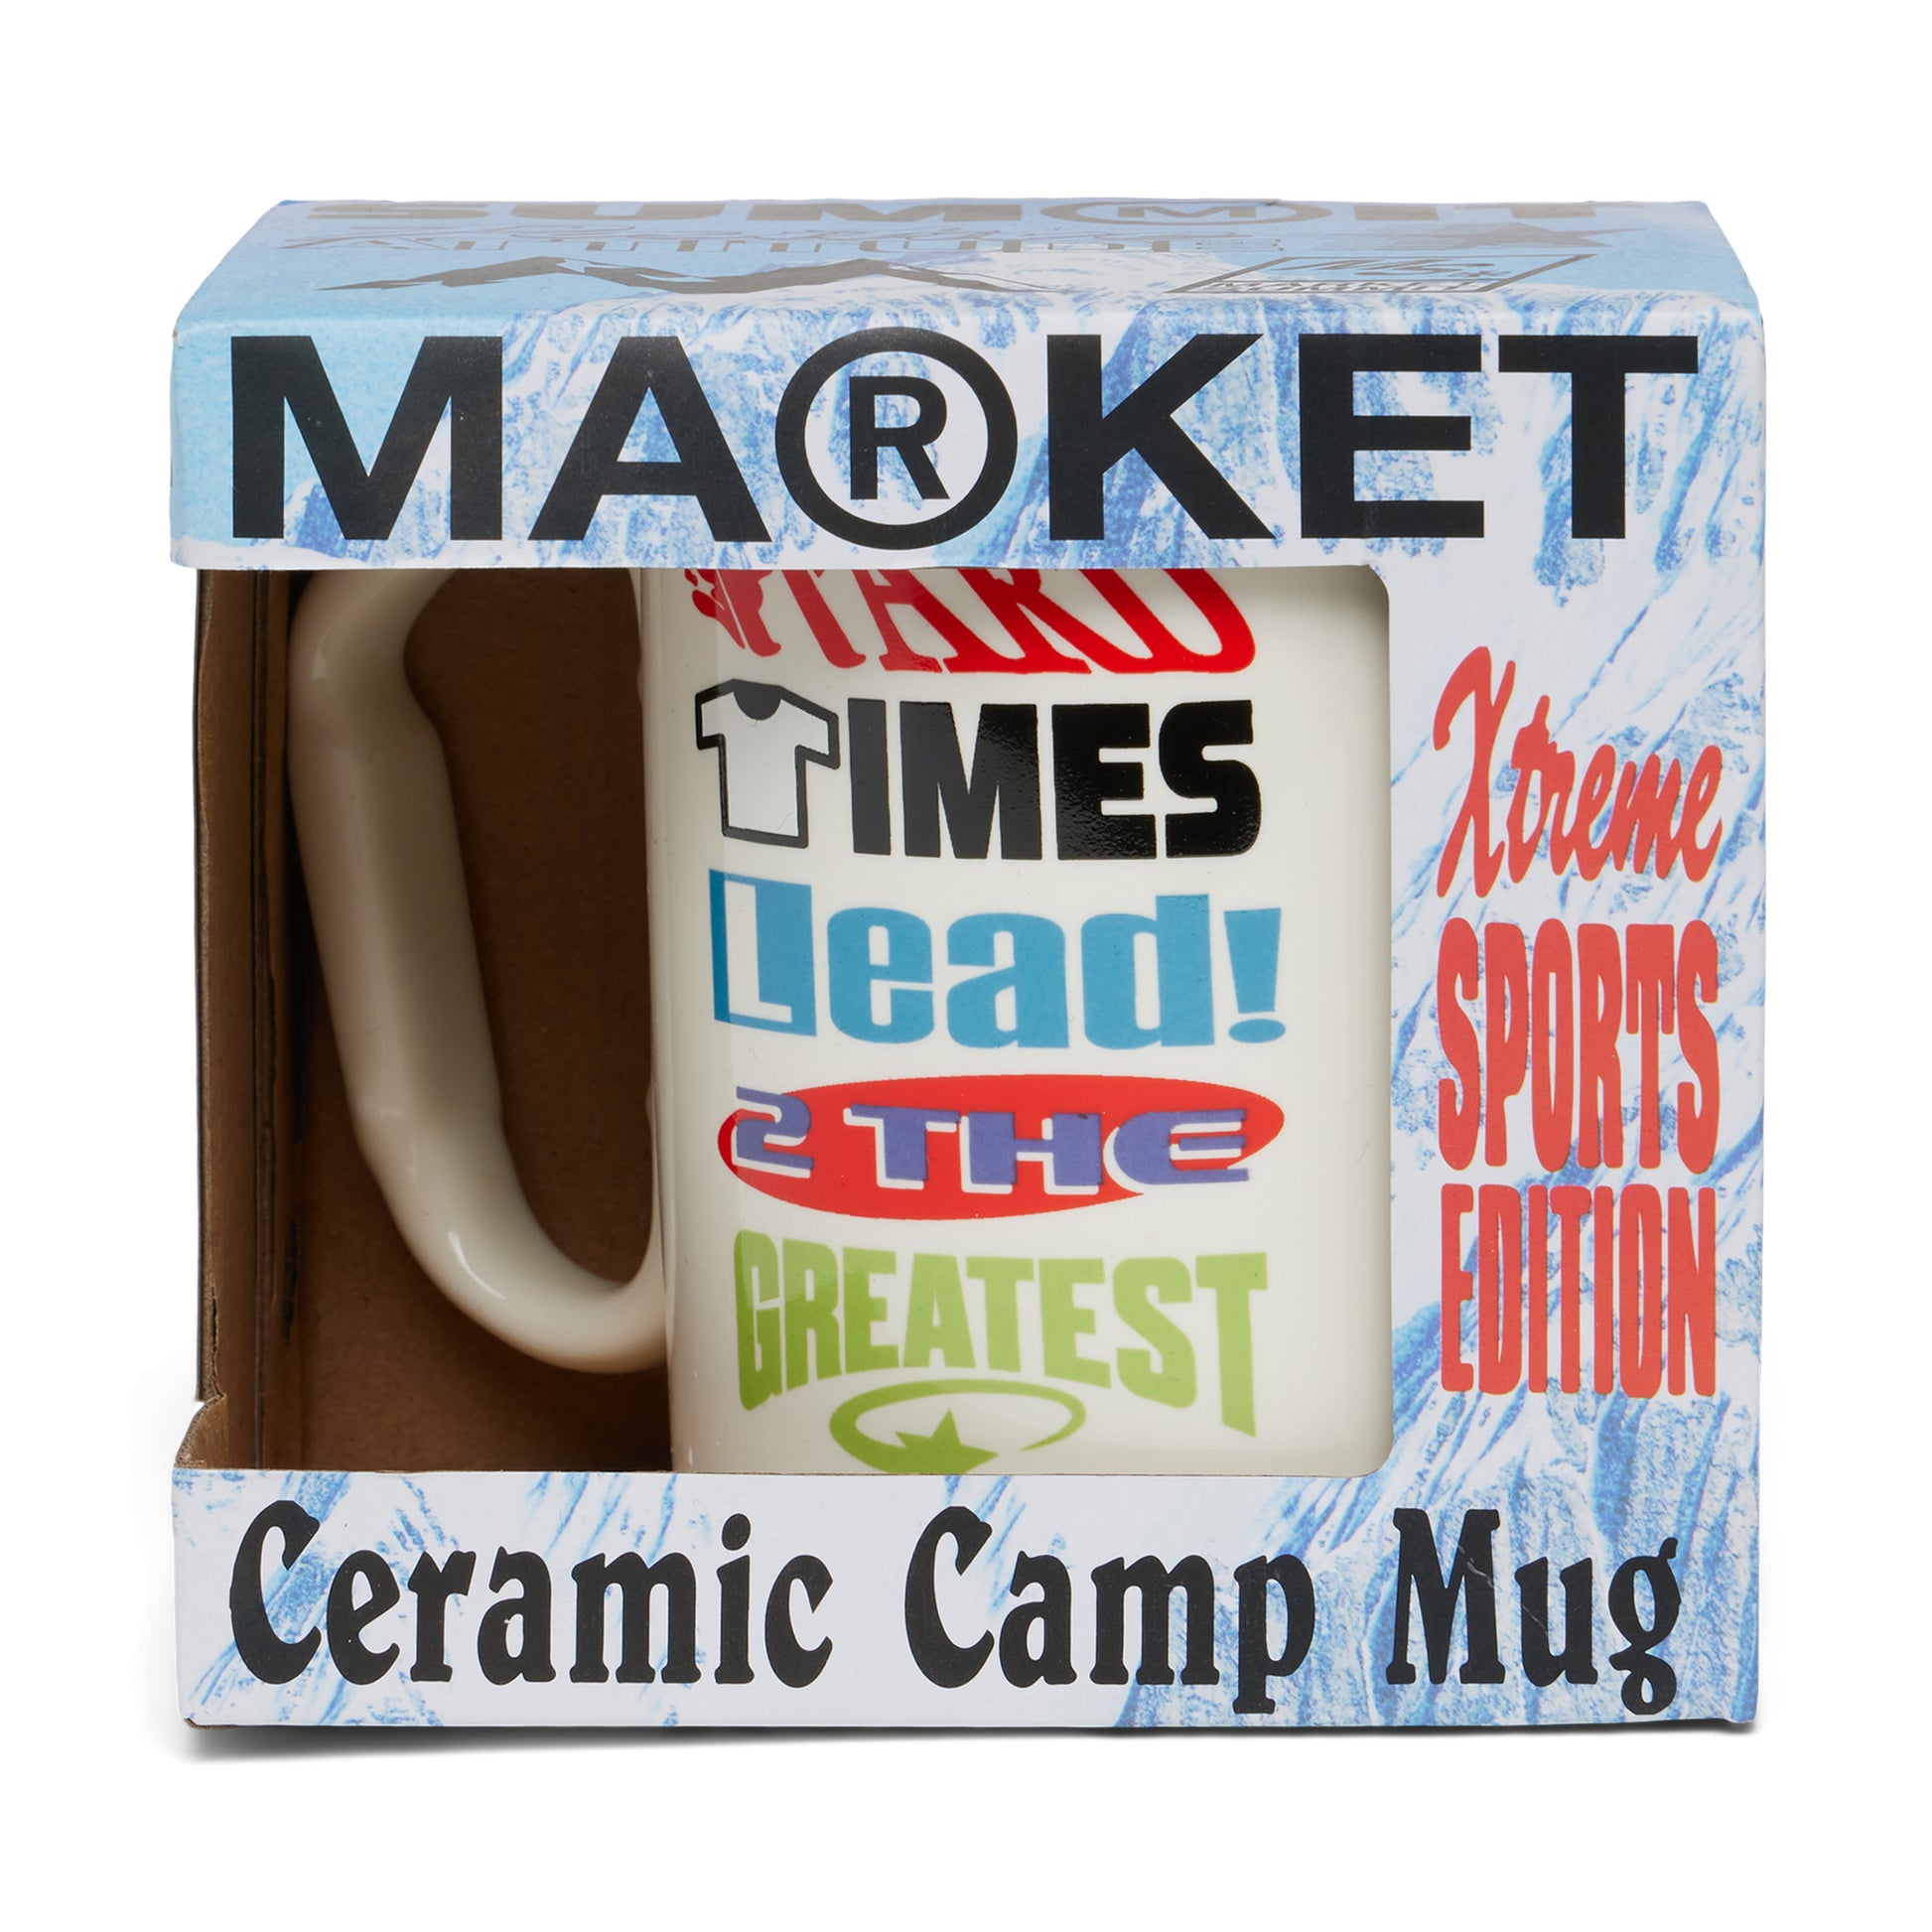 MARKET clothing brand HIGH ALTITUDE CARABINER MUG. Find more homegoods and graphic tees at MarketStudios.com. Formally Chinatown Market. 